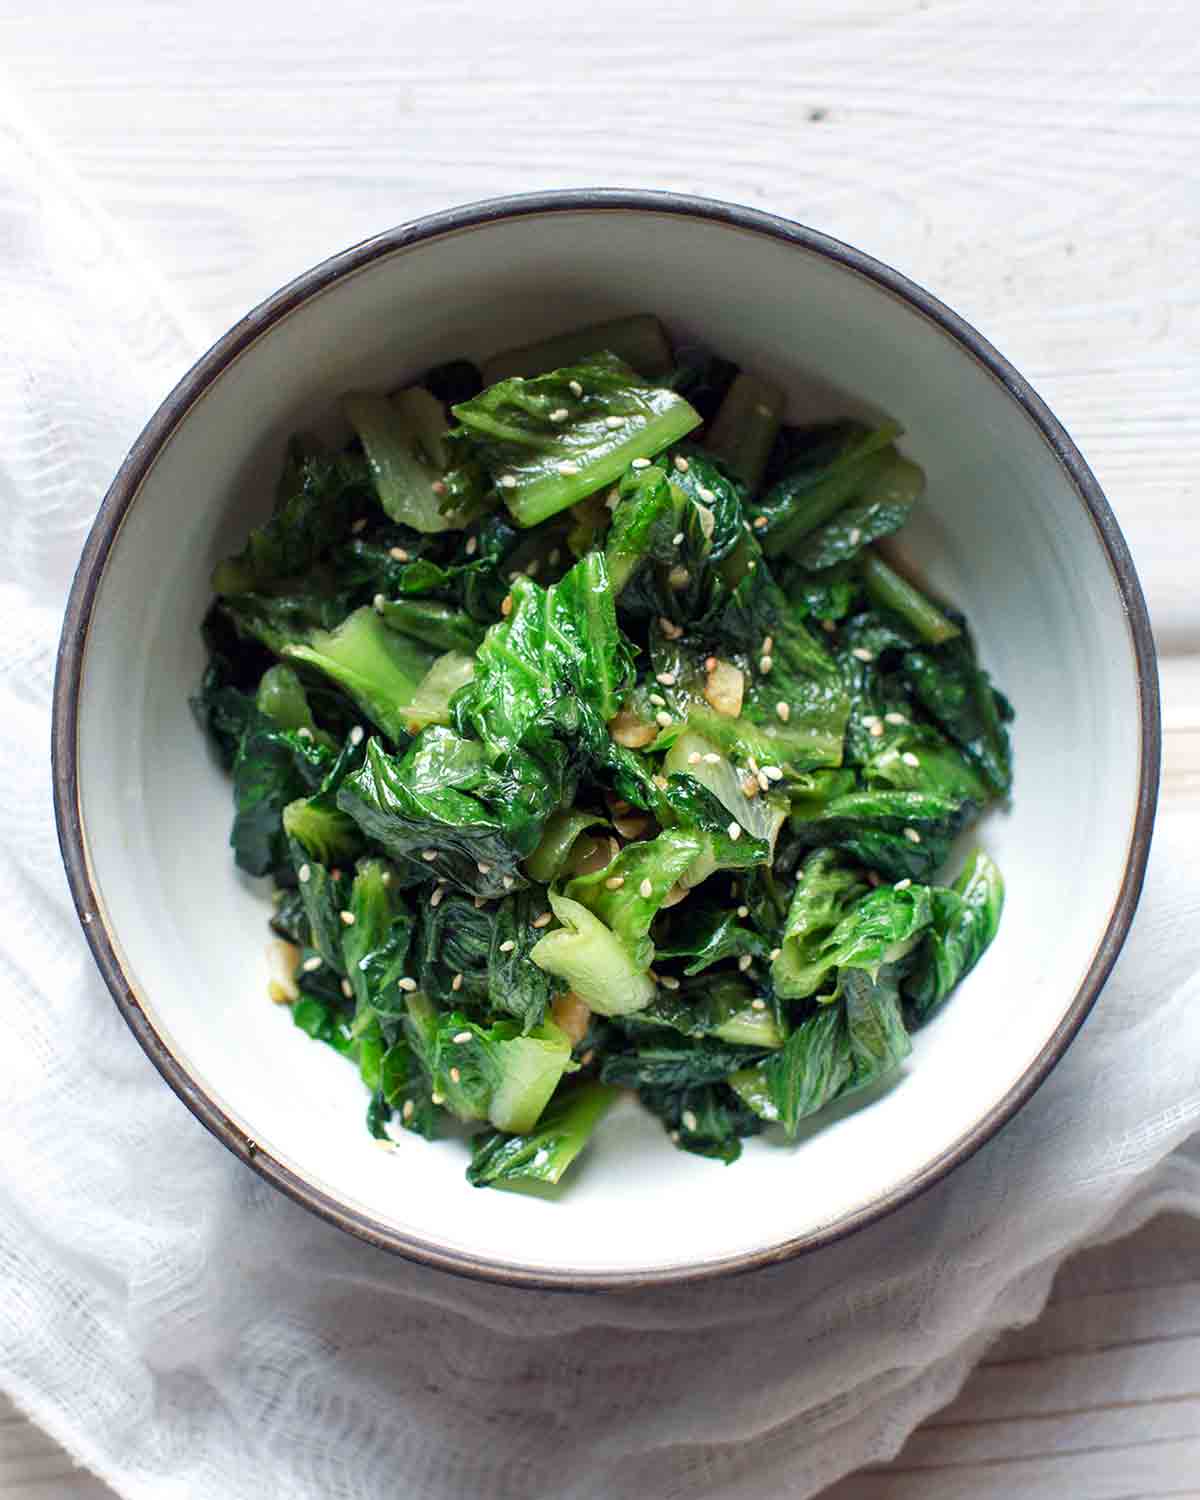 A white bowl filled with stir-fried lettuce, topped with sesame seeds on a white wooden surface.